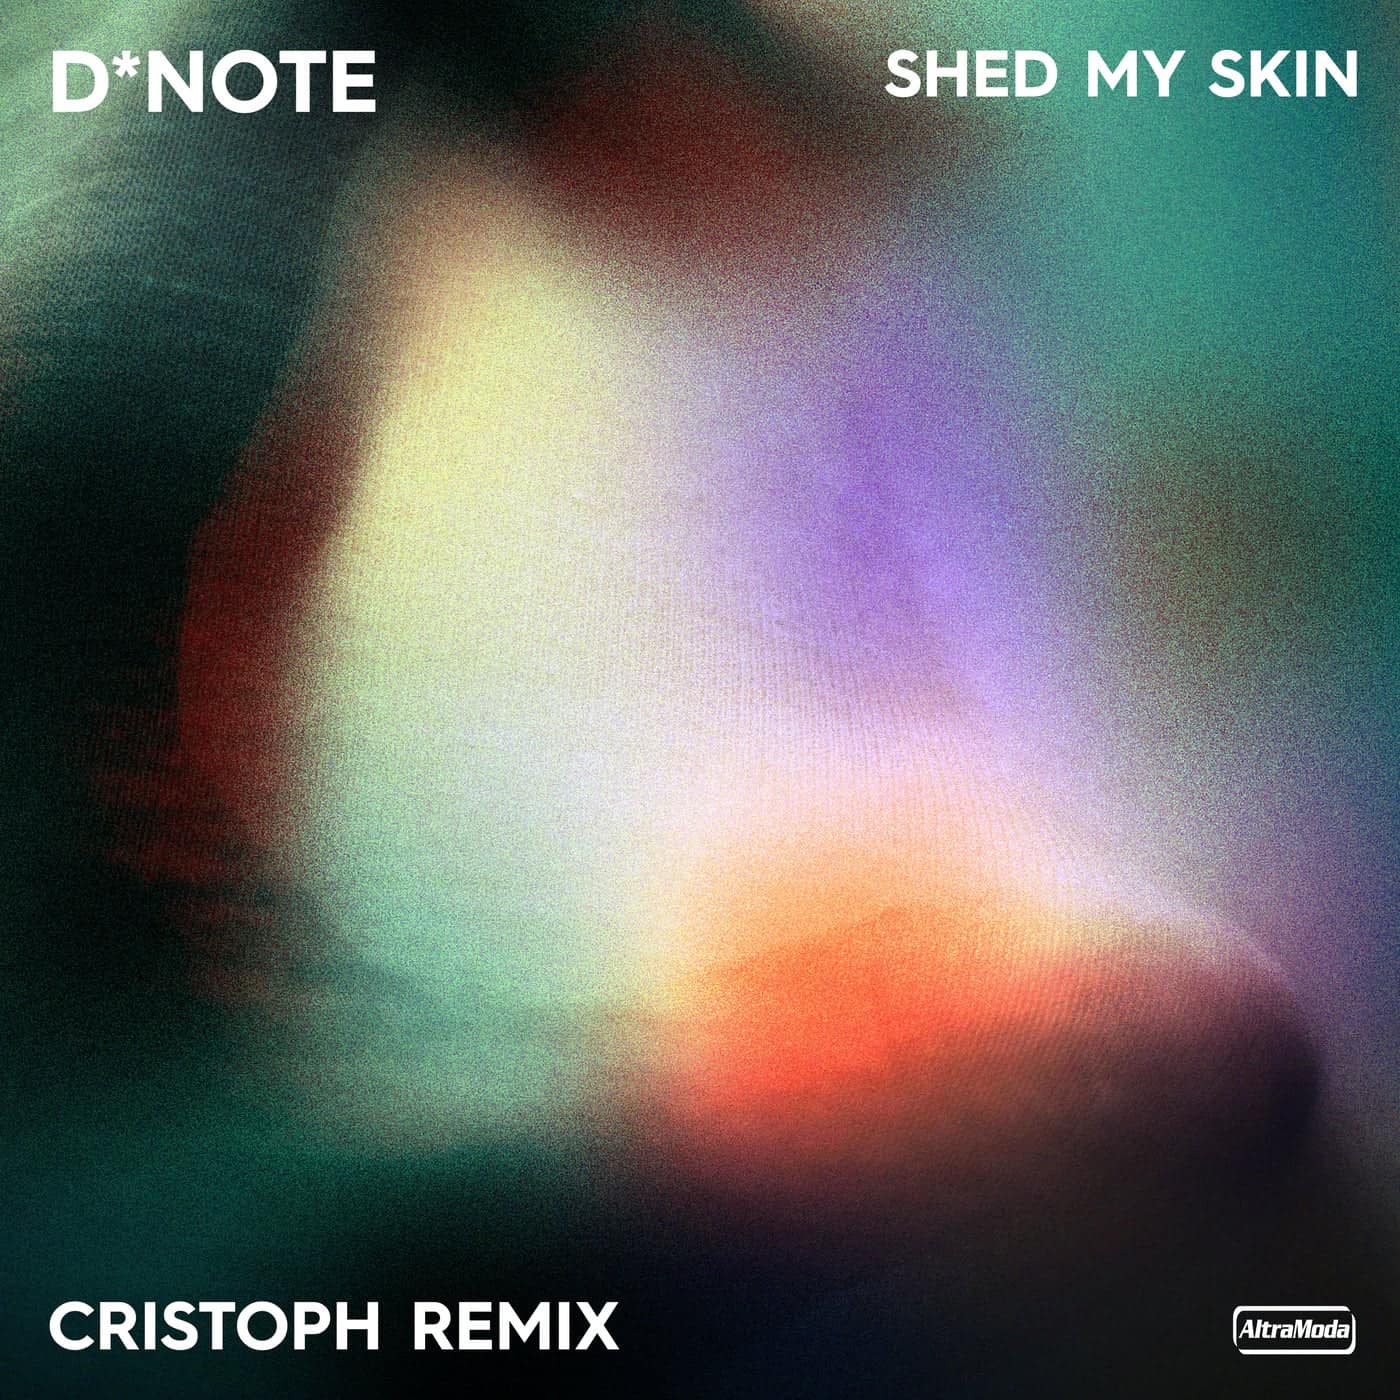 Download D*Note - Shed My Skin - Cristoph Remix on Electrobuzz